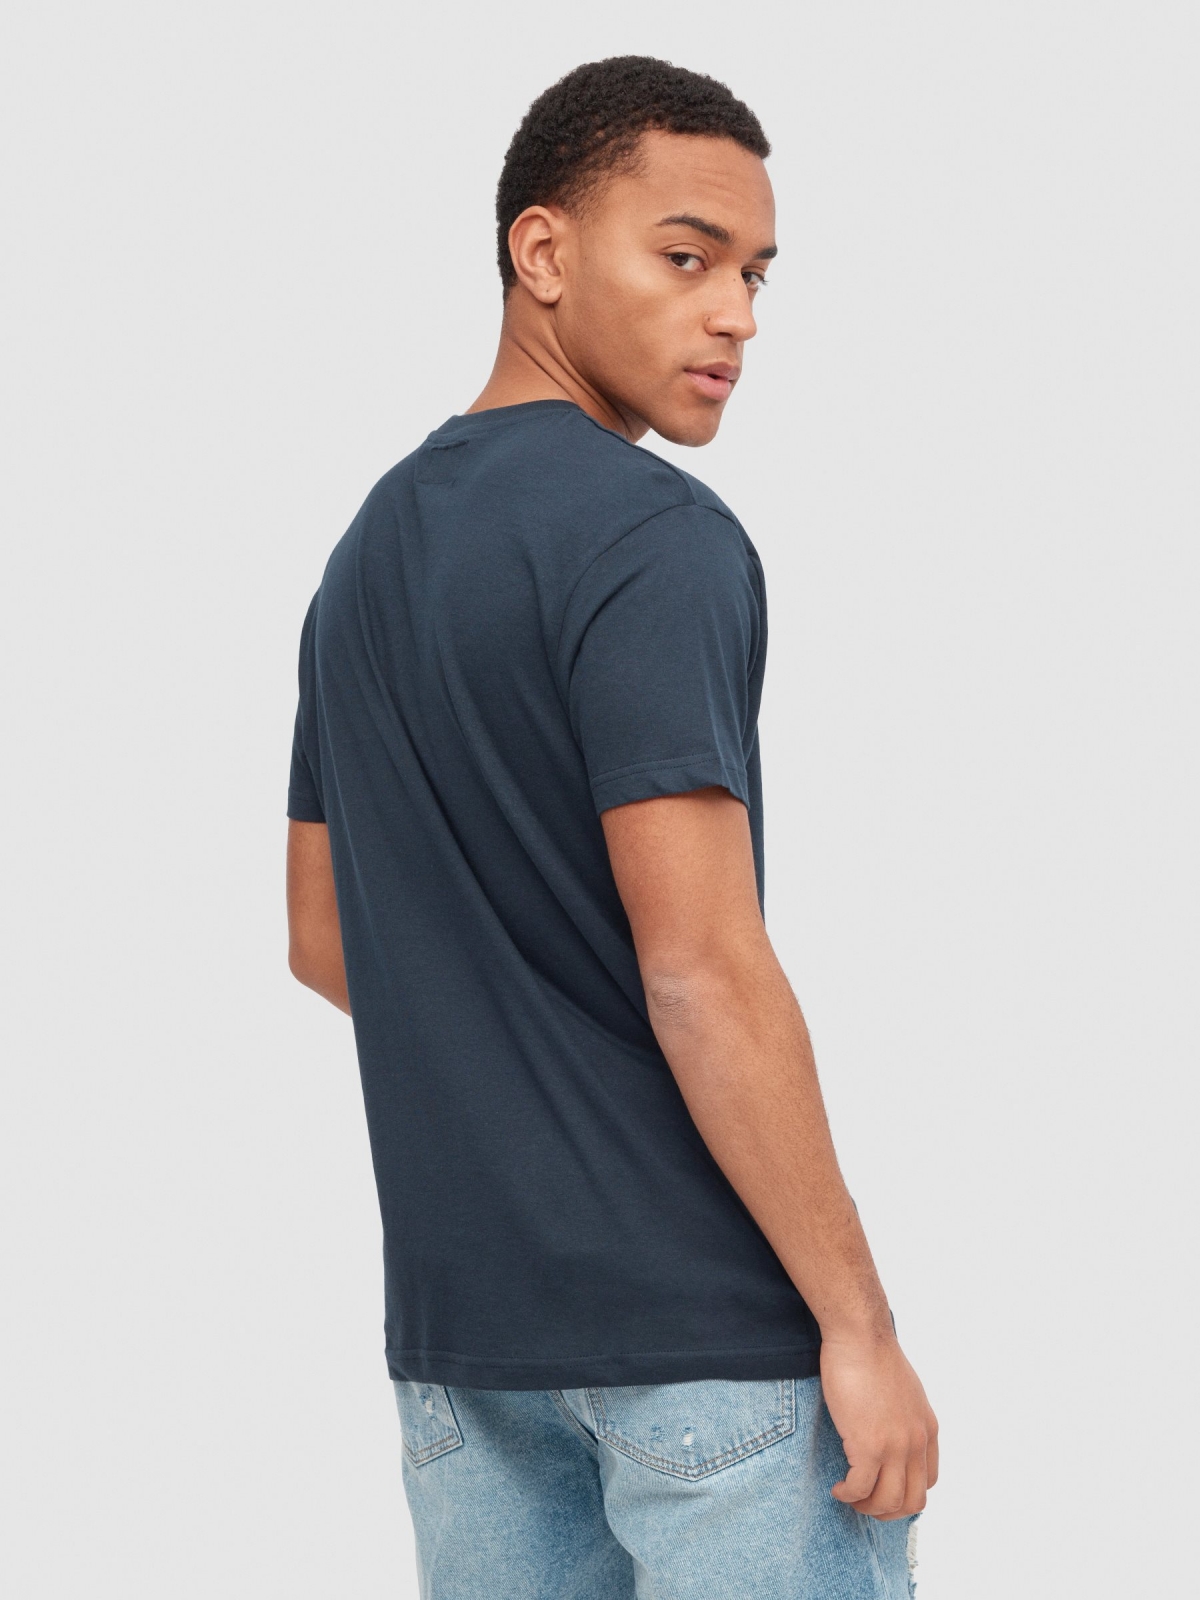 Basic T-shirt blue middle back view